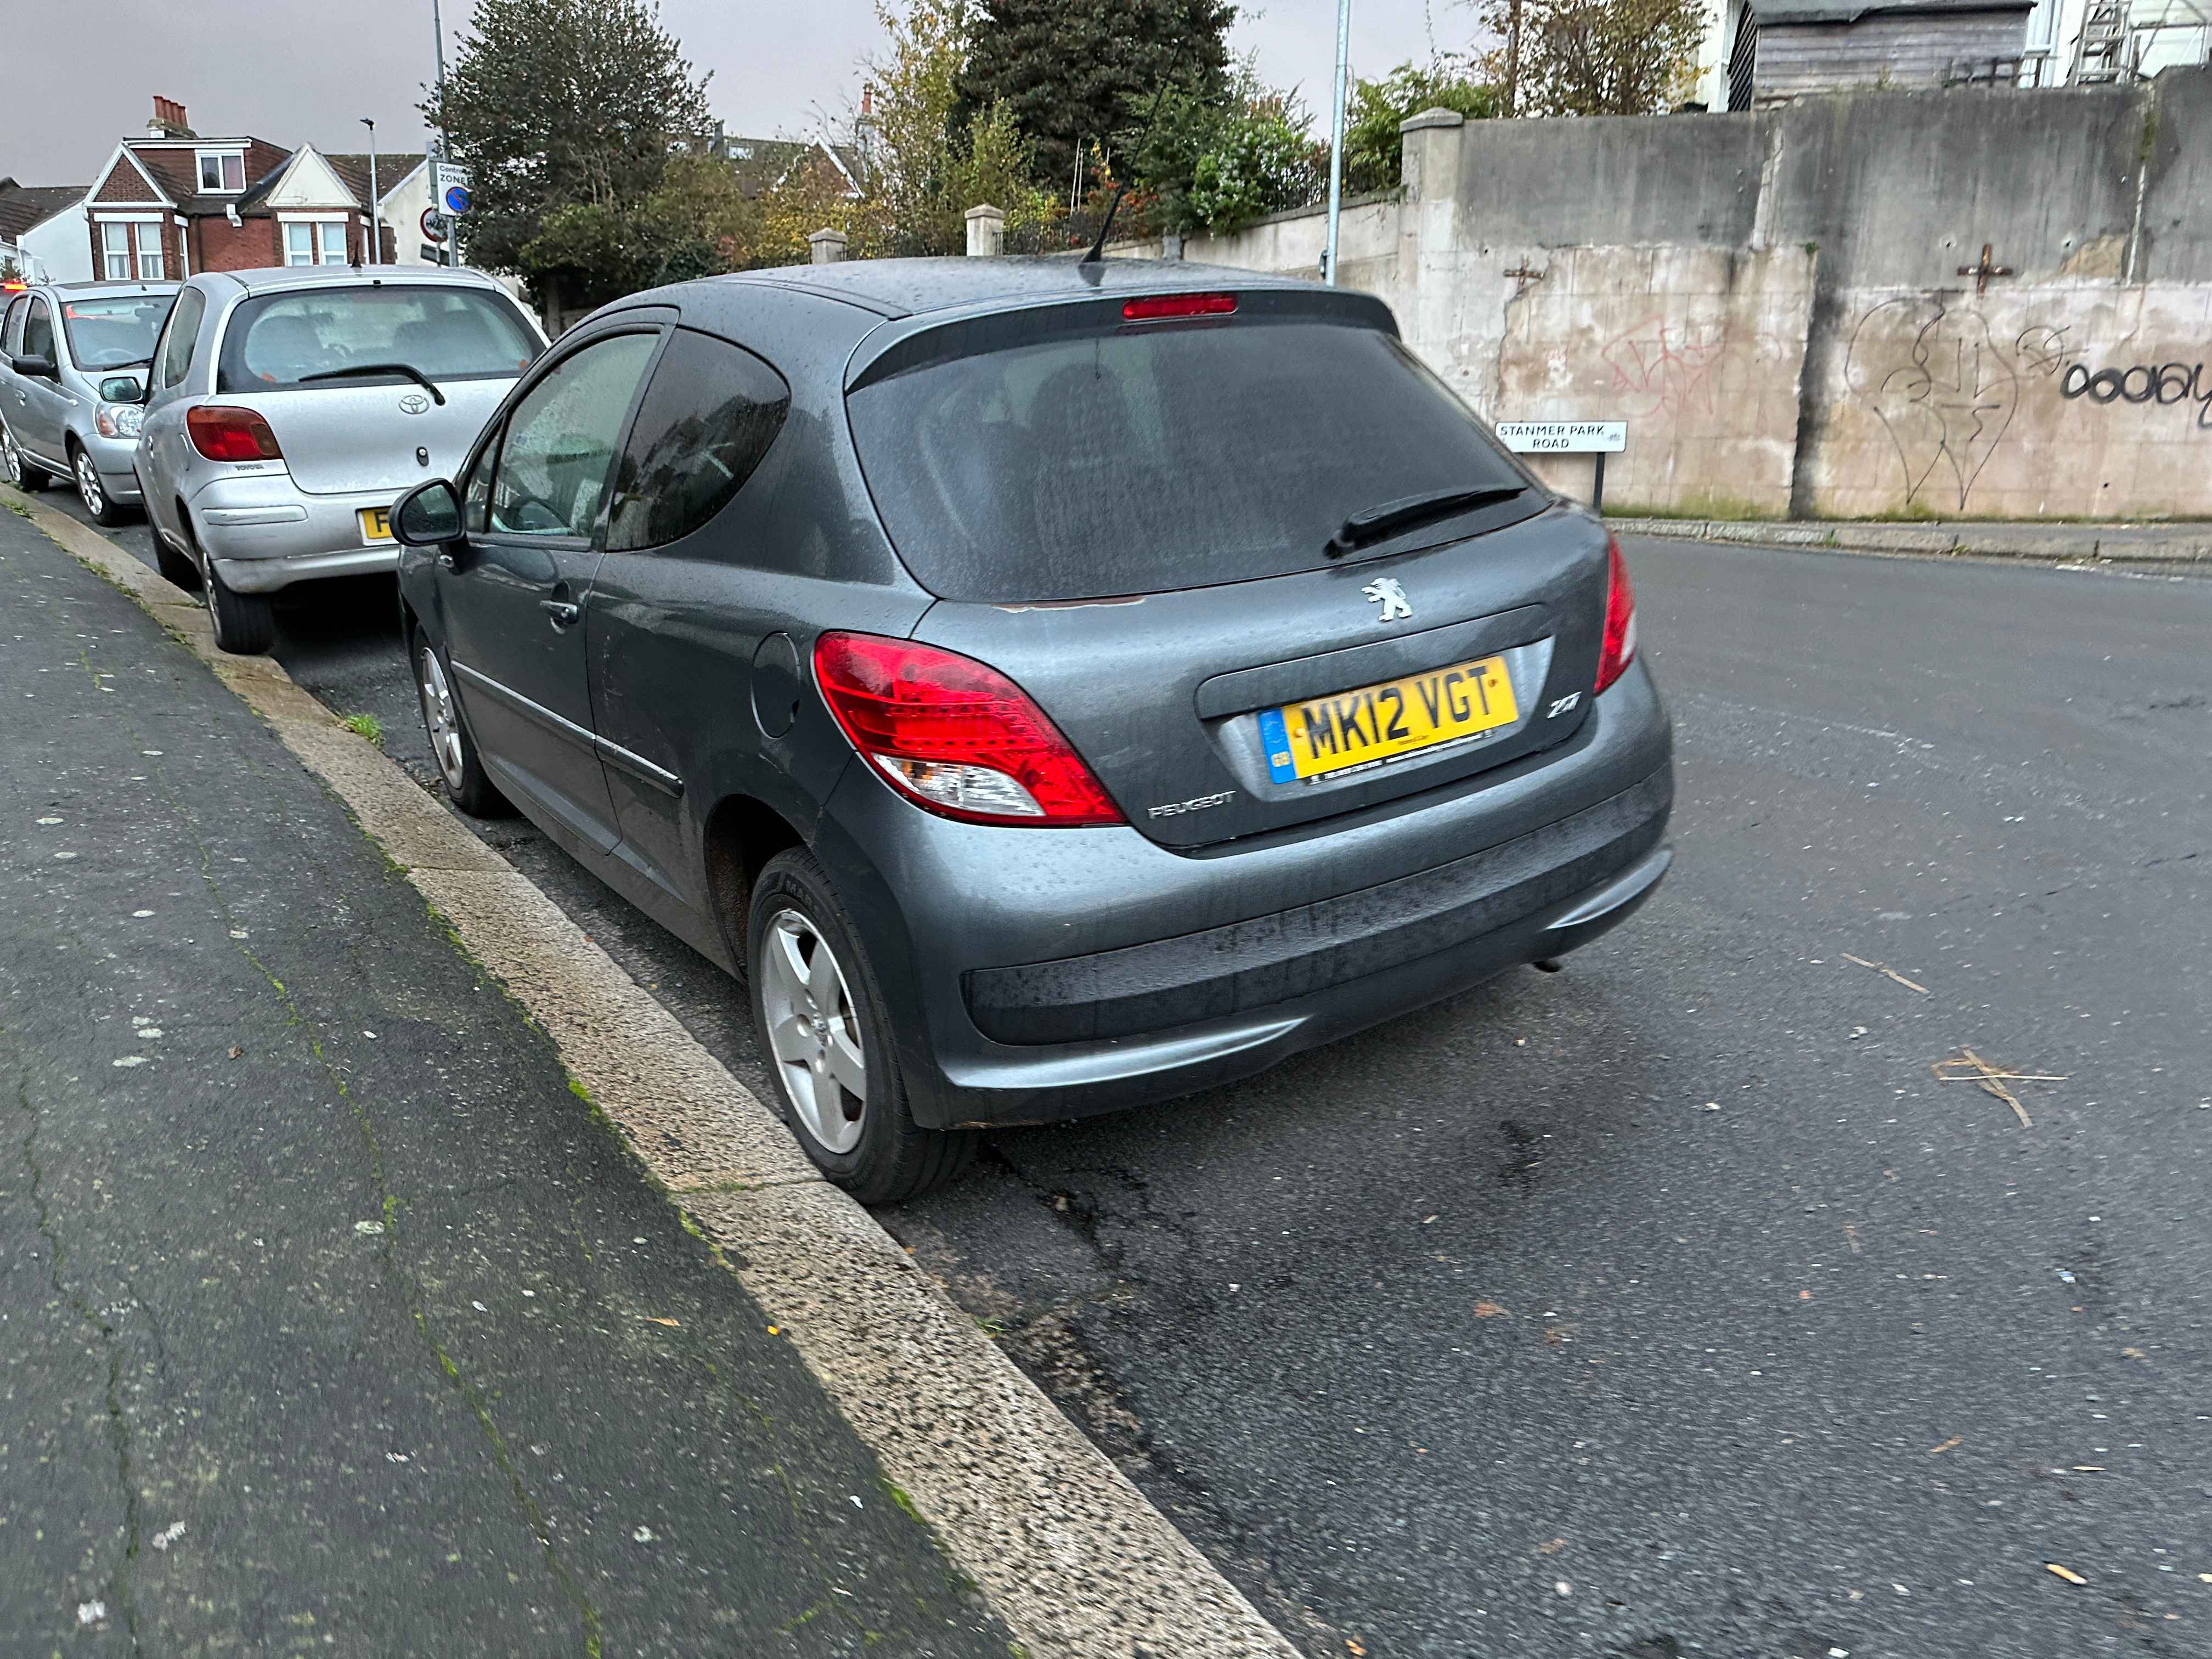 Photograph of MK12 VGT - a Grey Peugeot 207 parked in Hollingdean by a non-resident who uses the local area as part of their Brighton commute. The fourth of six photographs supplied by the residents of Hollingdean.